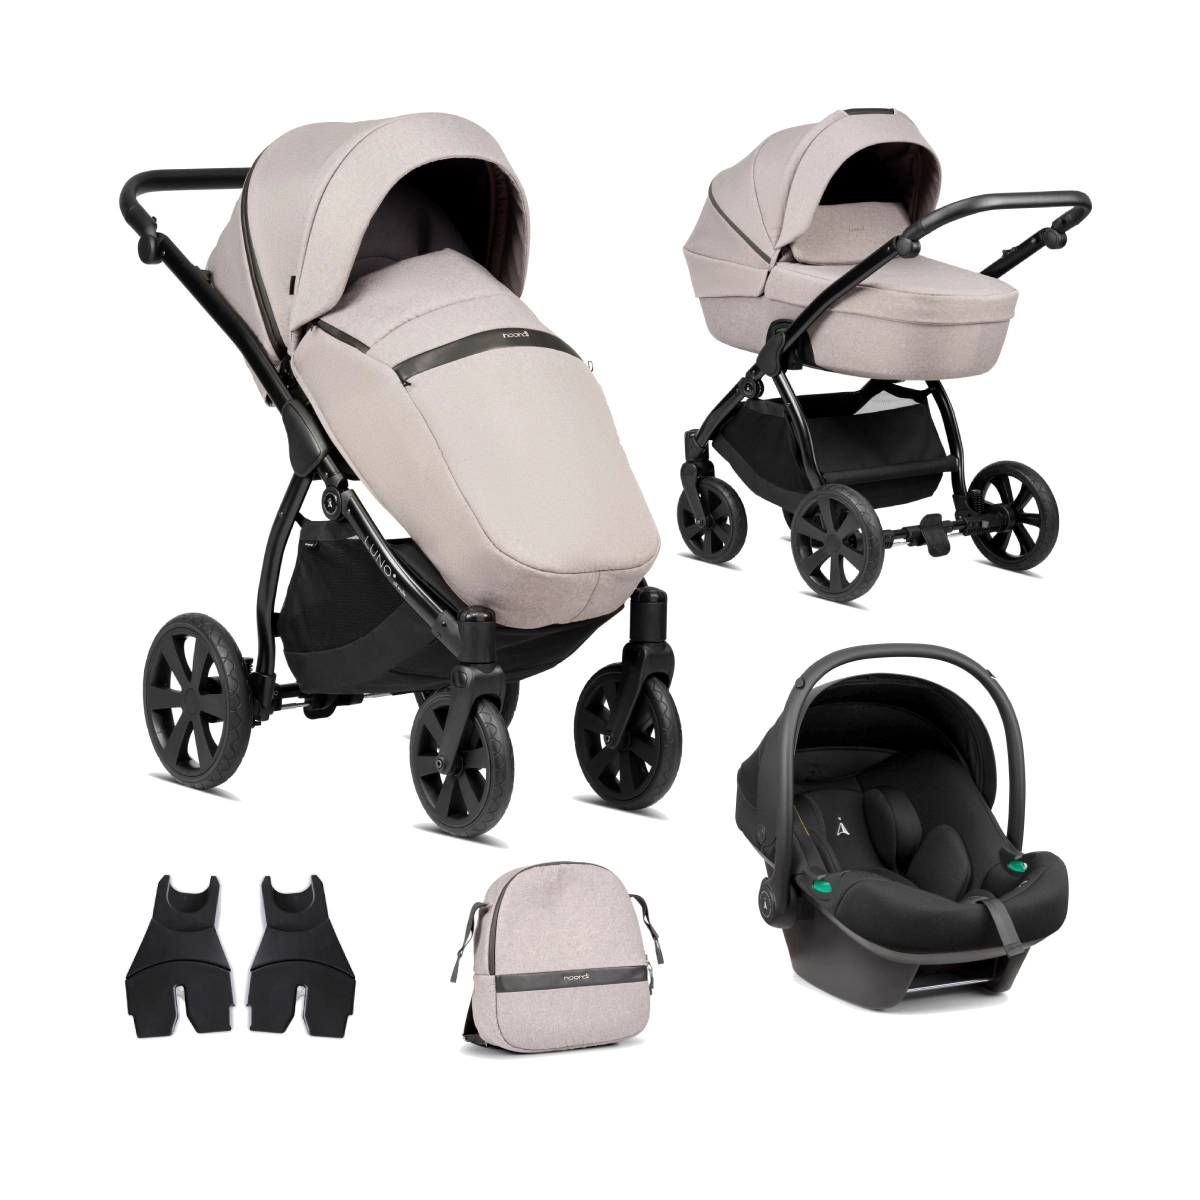 Noordi Luno All Trails 3in1 Travel System with Terra i-Size Car Seat